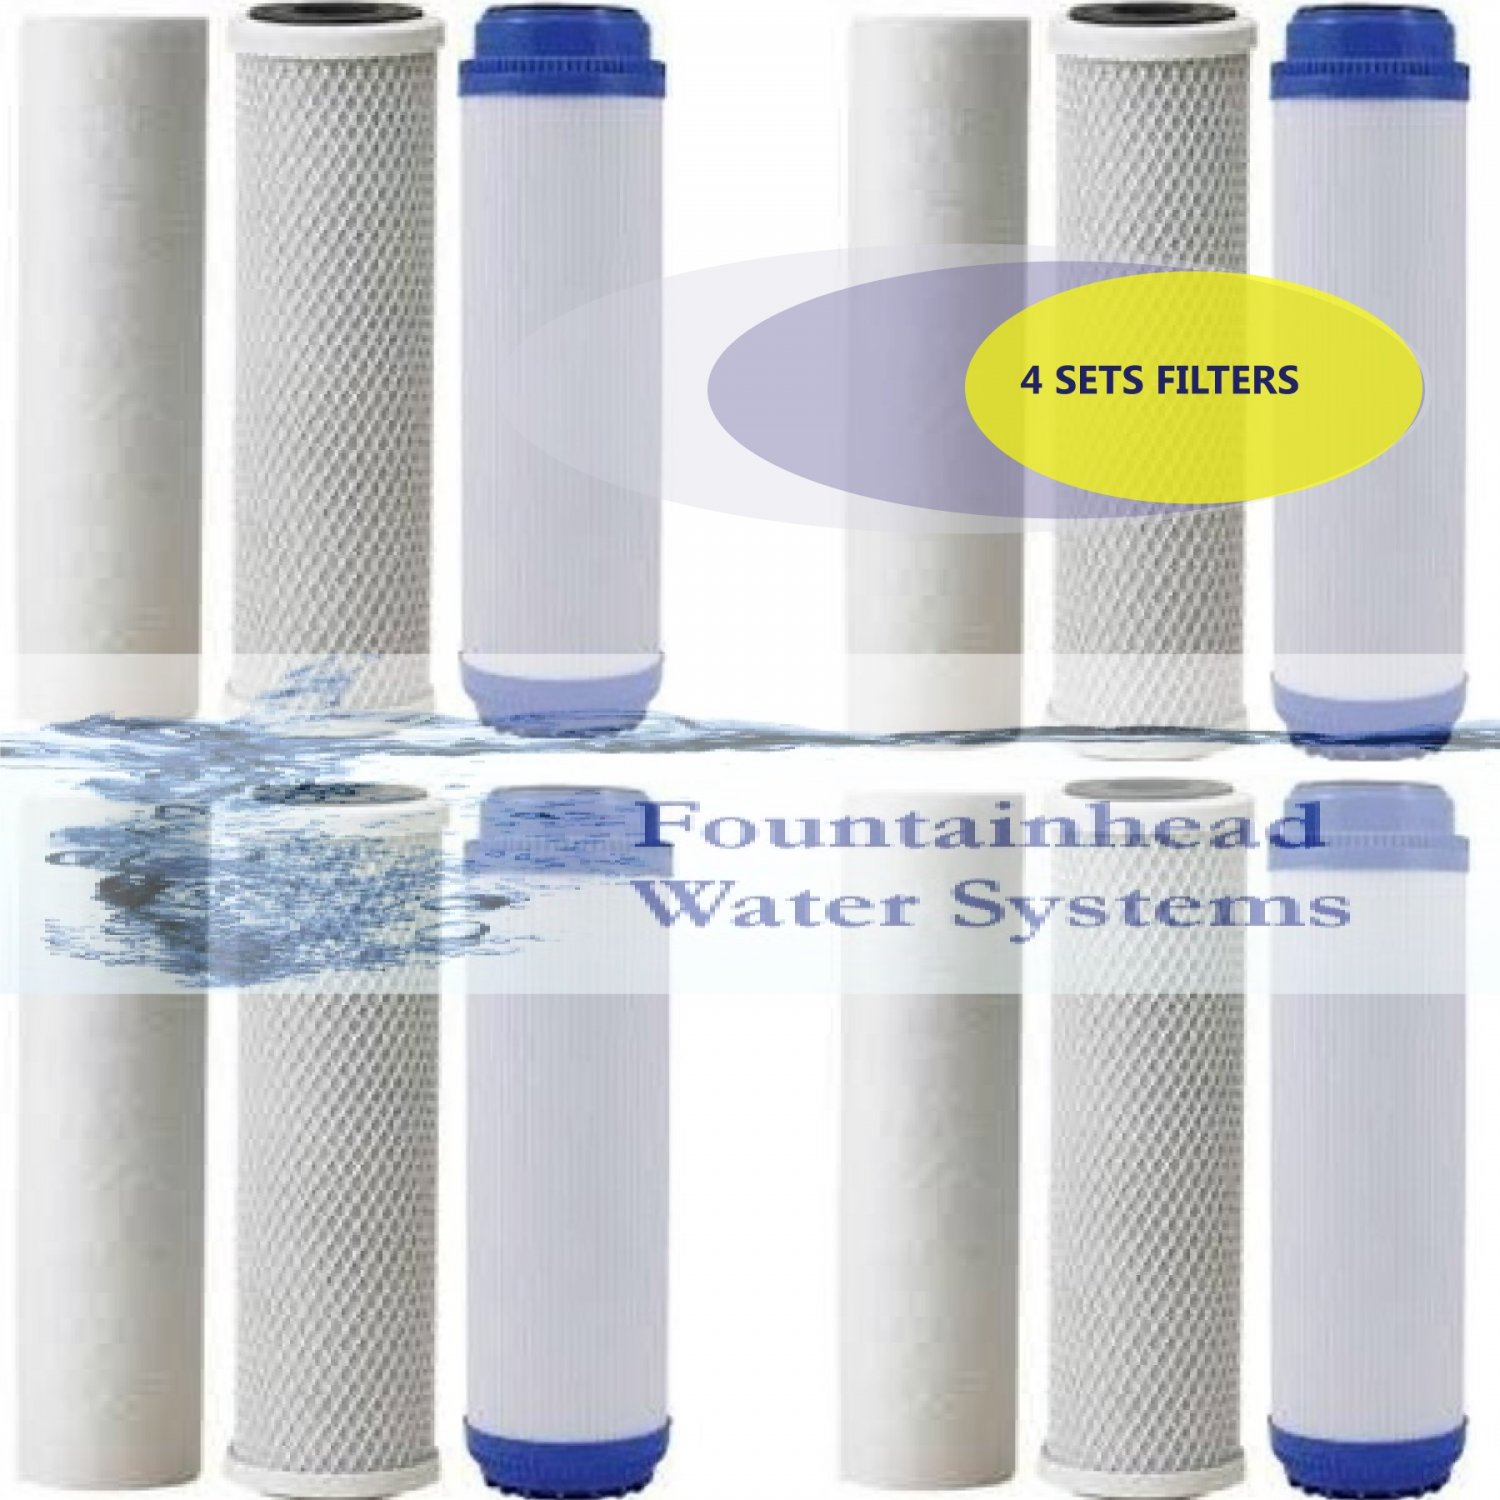 FOUNTAINHEAD 12 PIECE 3 STAGE WATER FILTERS SEDIMENT/GAC/CARBON BLOCK ...